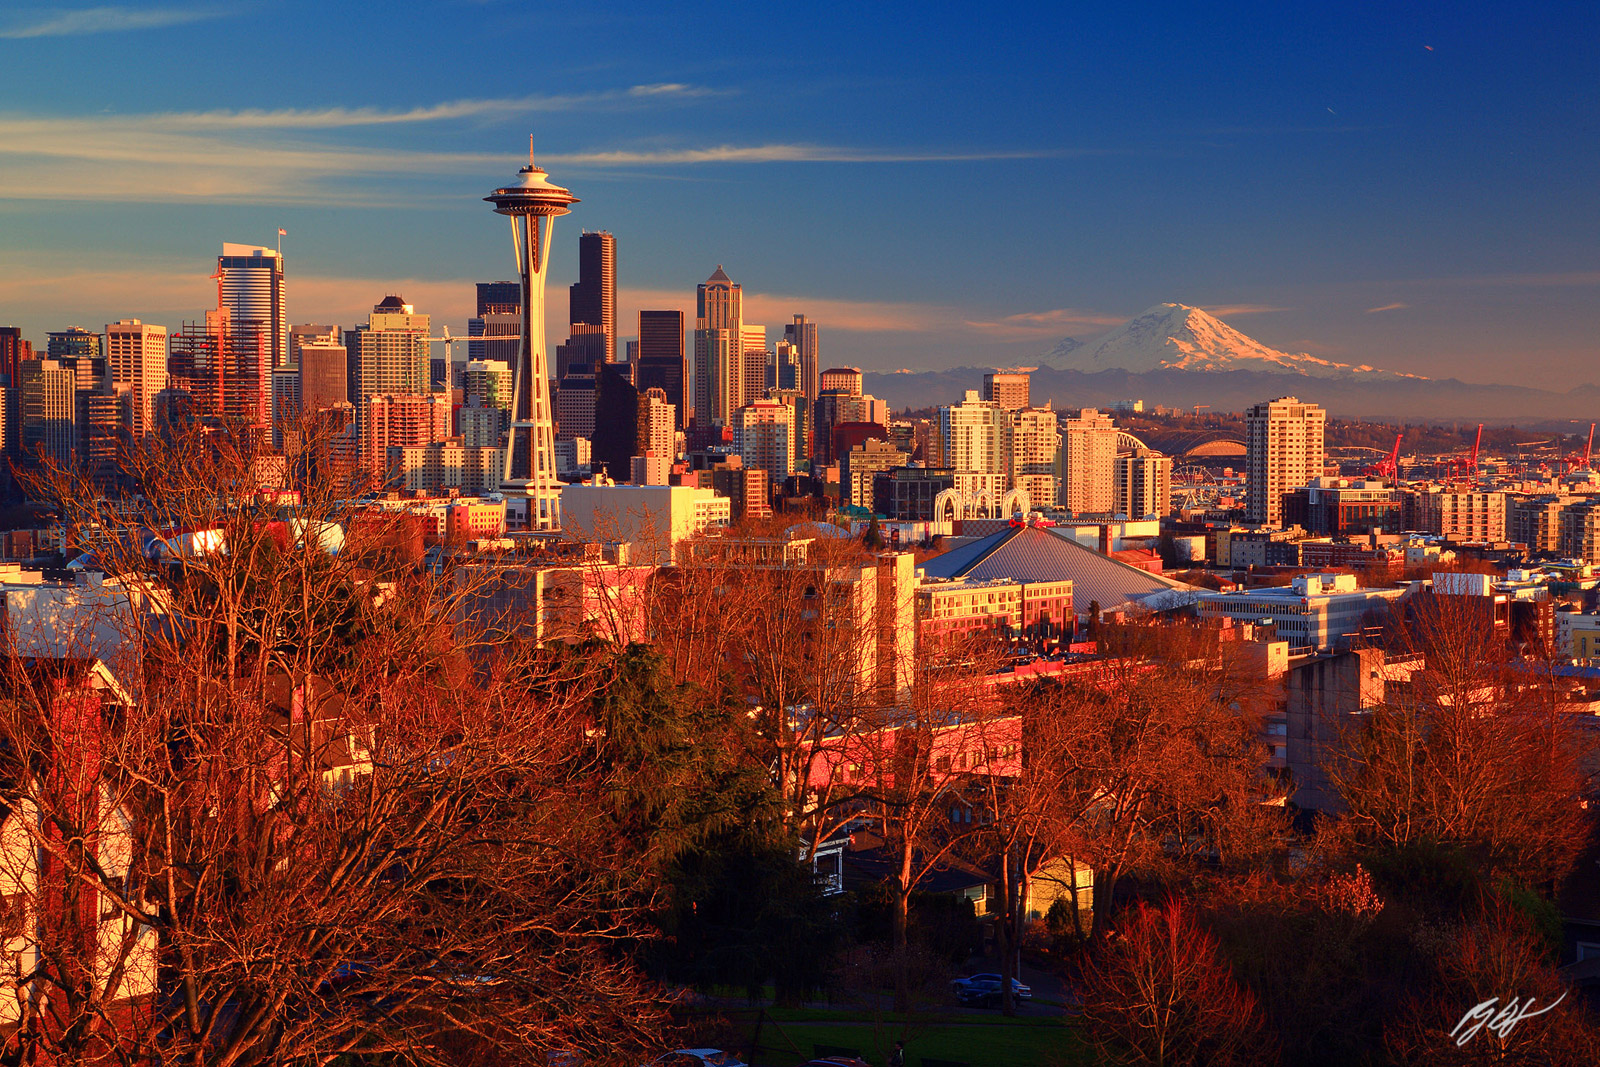 Seattle Skyline from Kerry Park on Queen Ann Hill from Seattle, Washington